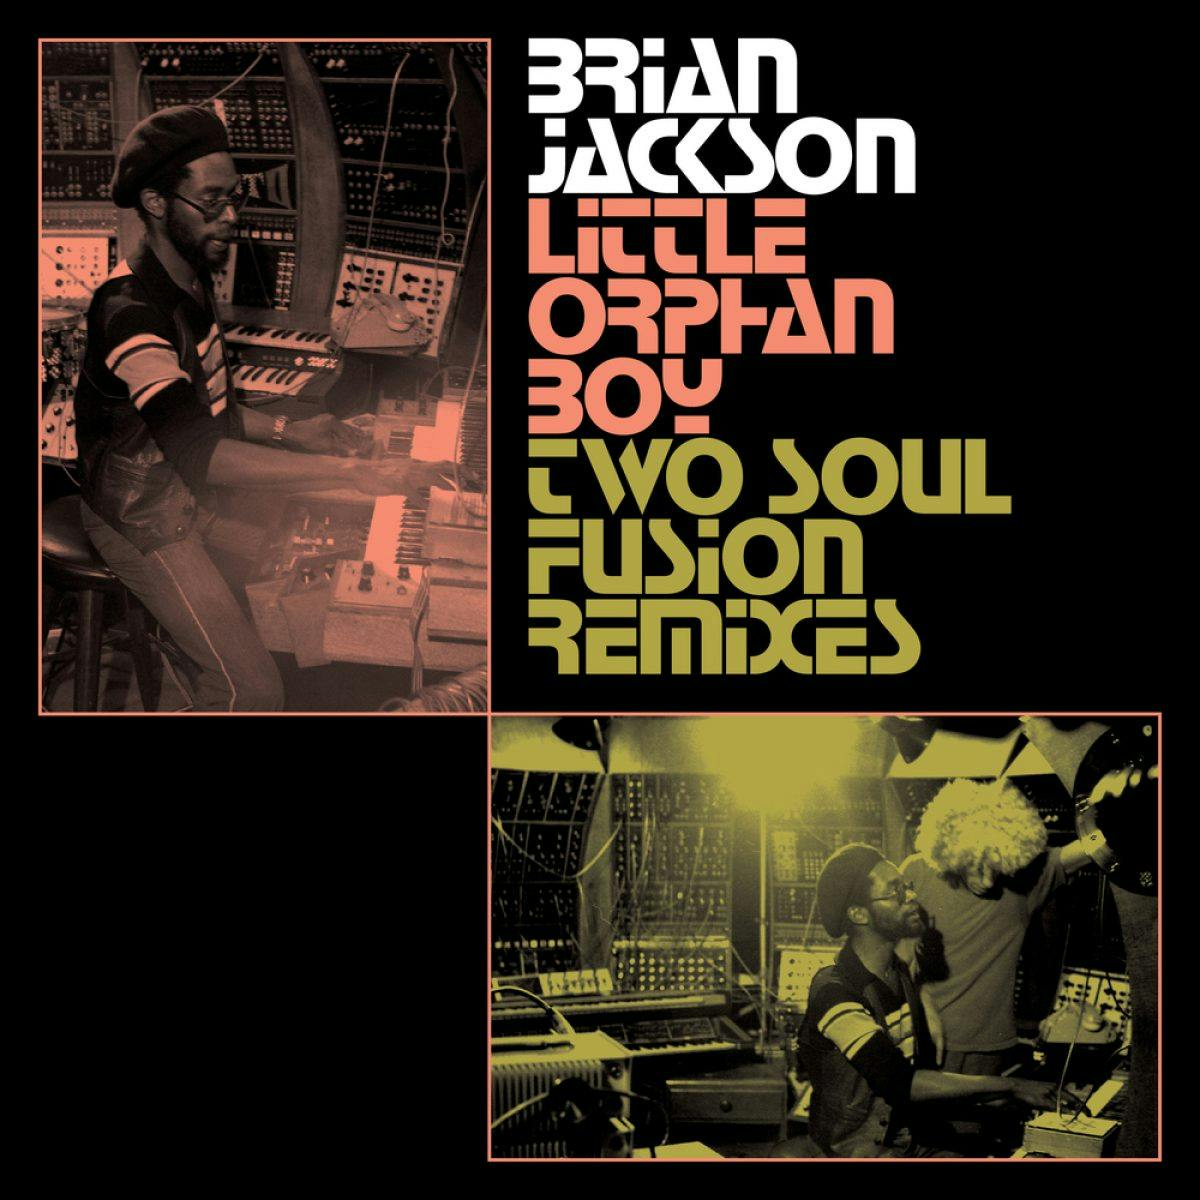 ‘Little Orphan Boy’ is the second single taken from album ‘This Is Brian Jackson’, presented with remixes by Two Soul Fusion, a.k.a. Louie Vega and Josh Milan.